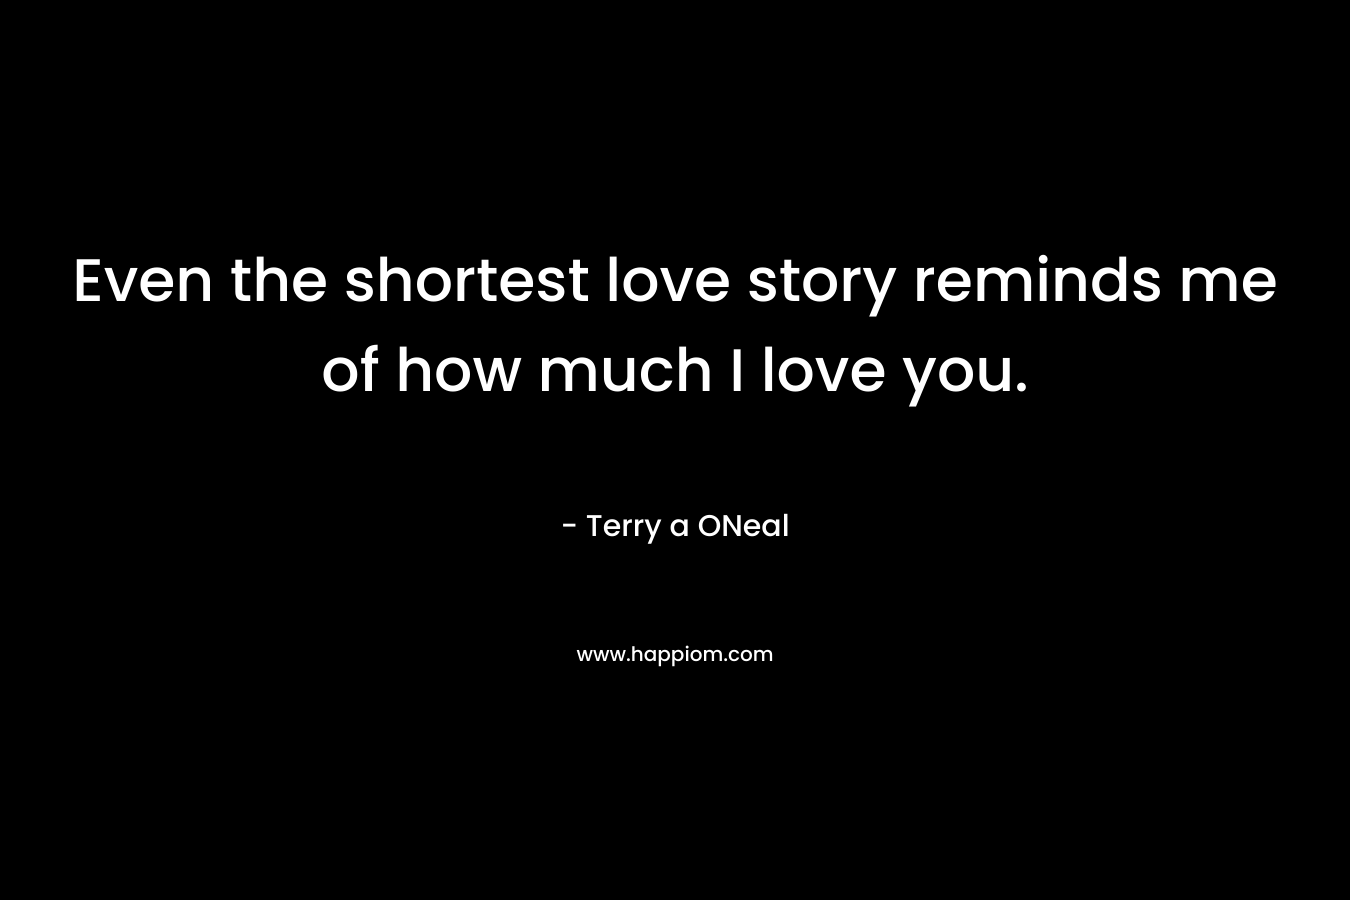 Even the shortest love story reminds me of how much I love you.